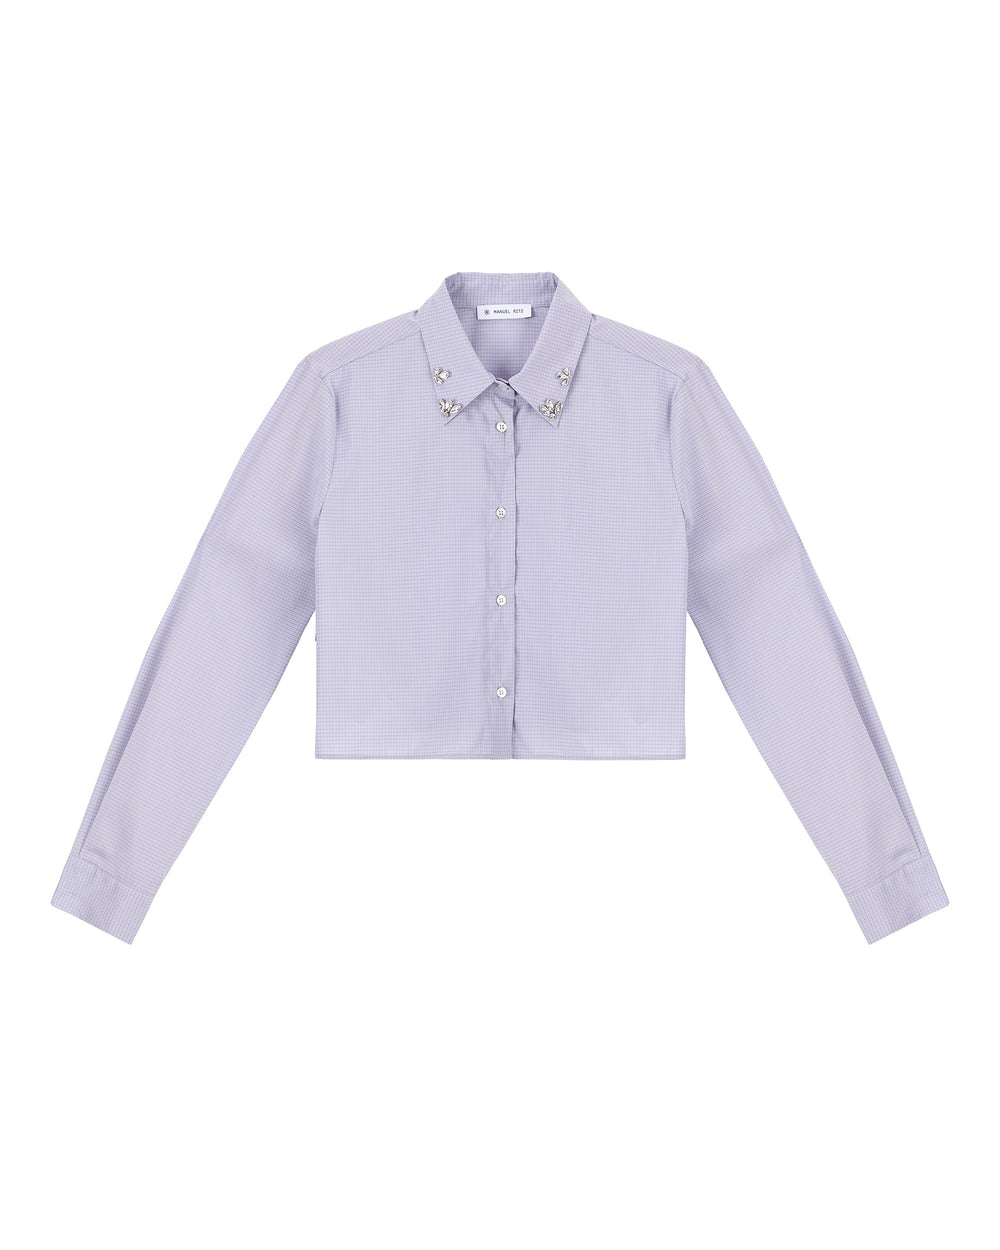 gray microcheck cropped shirt with appliqués